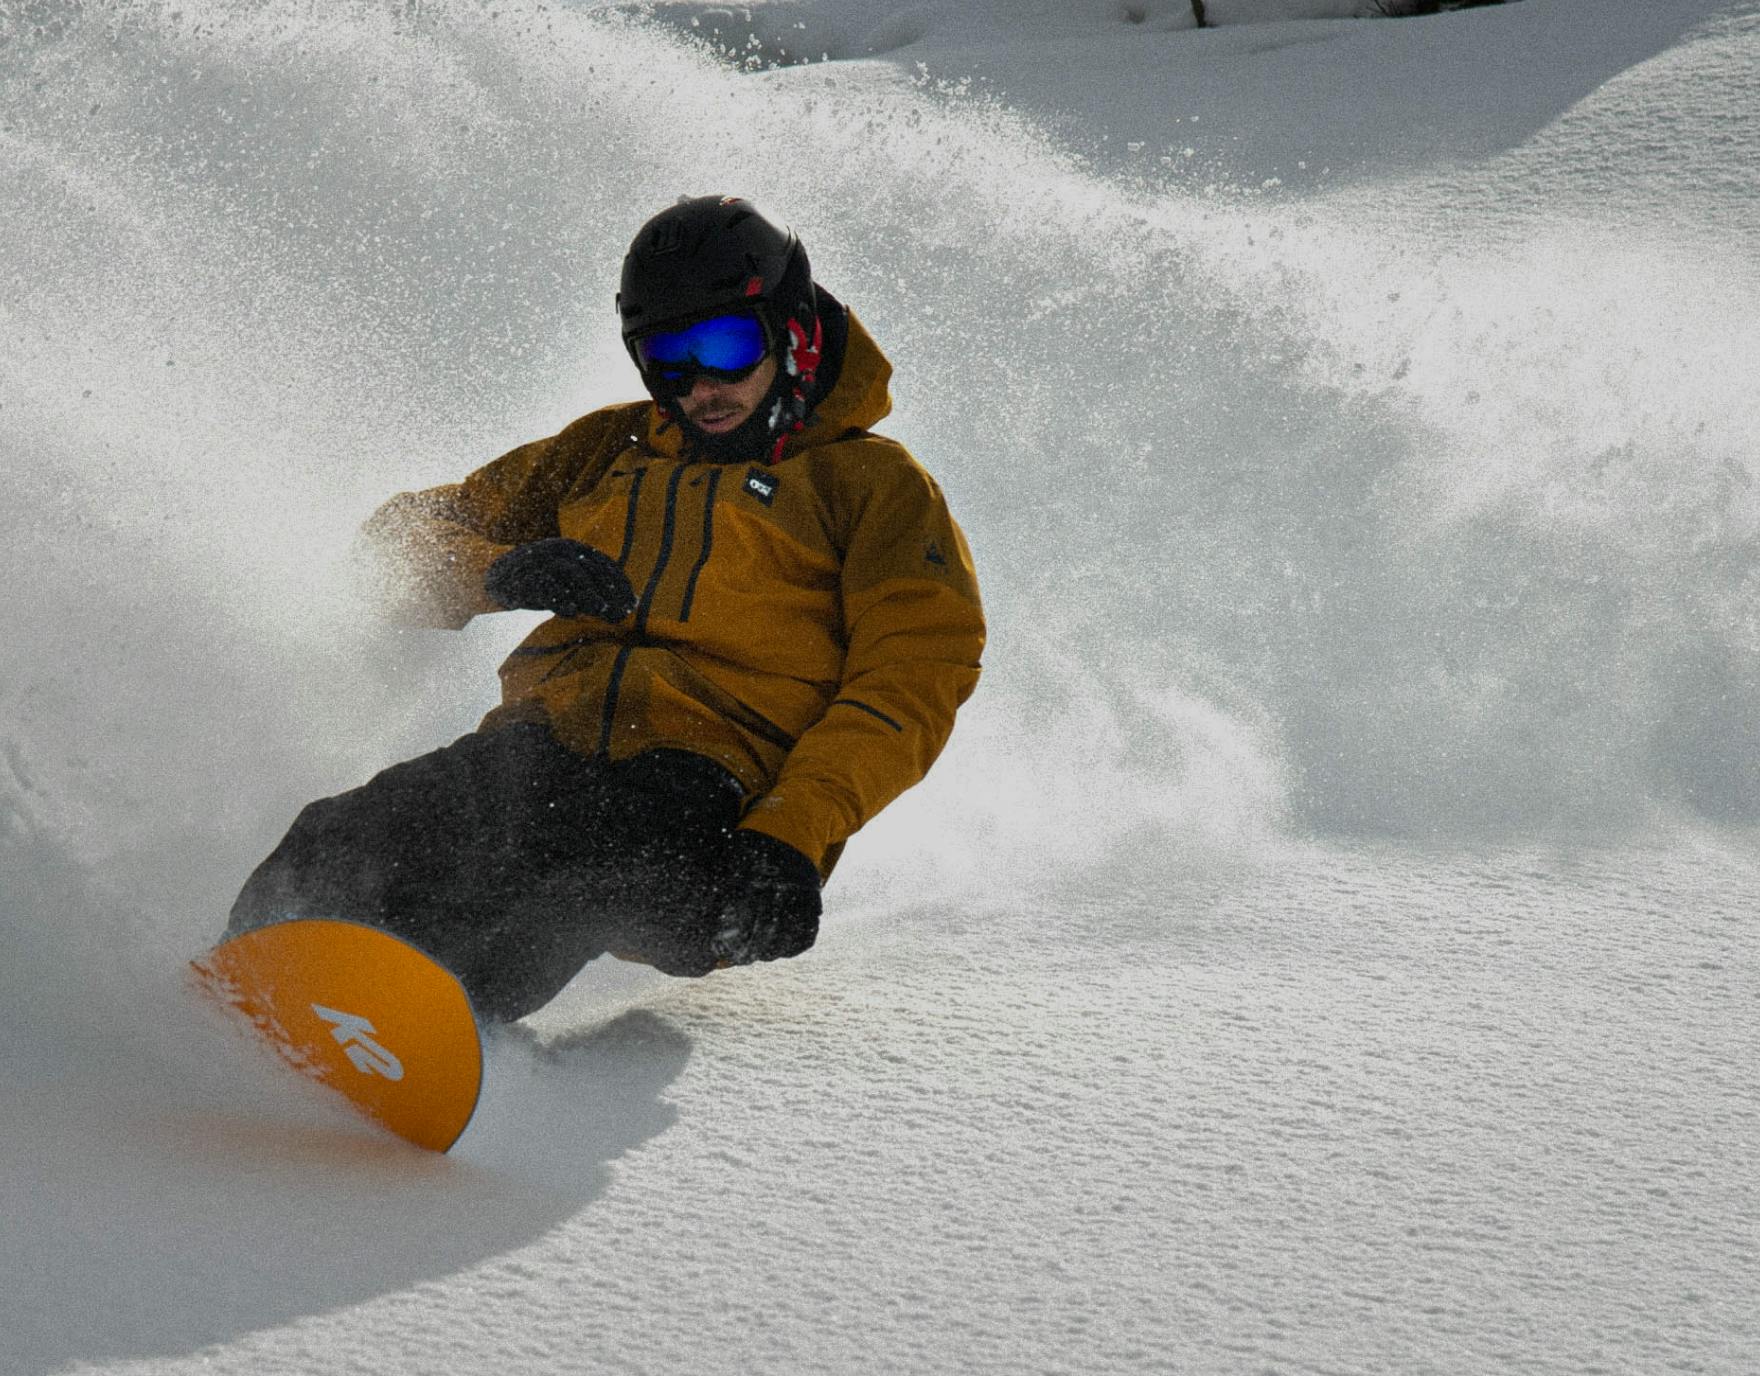 A snowboarder on a mountain